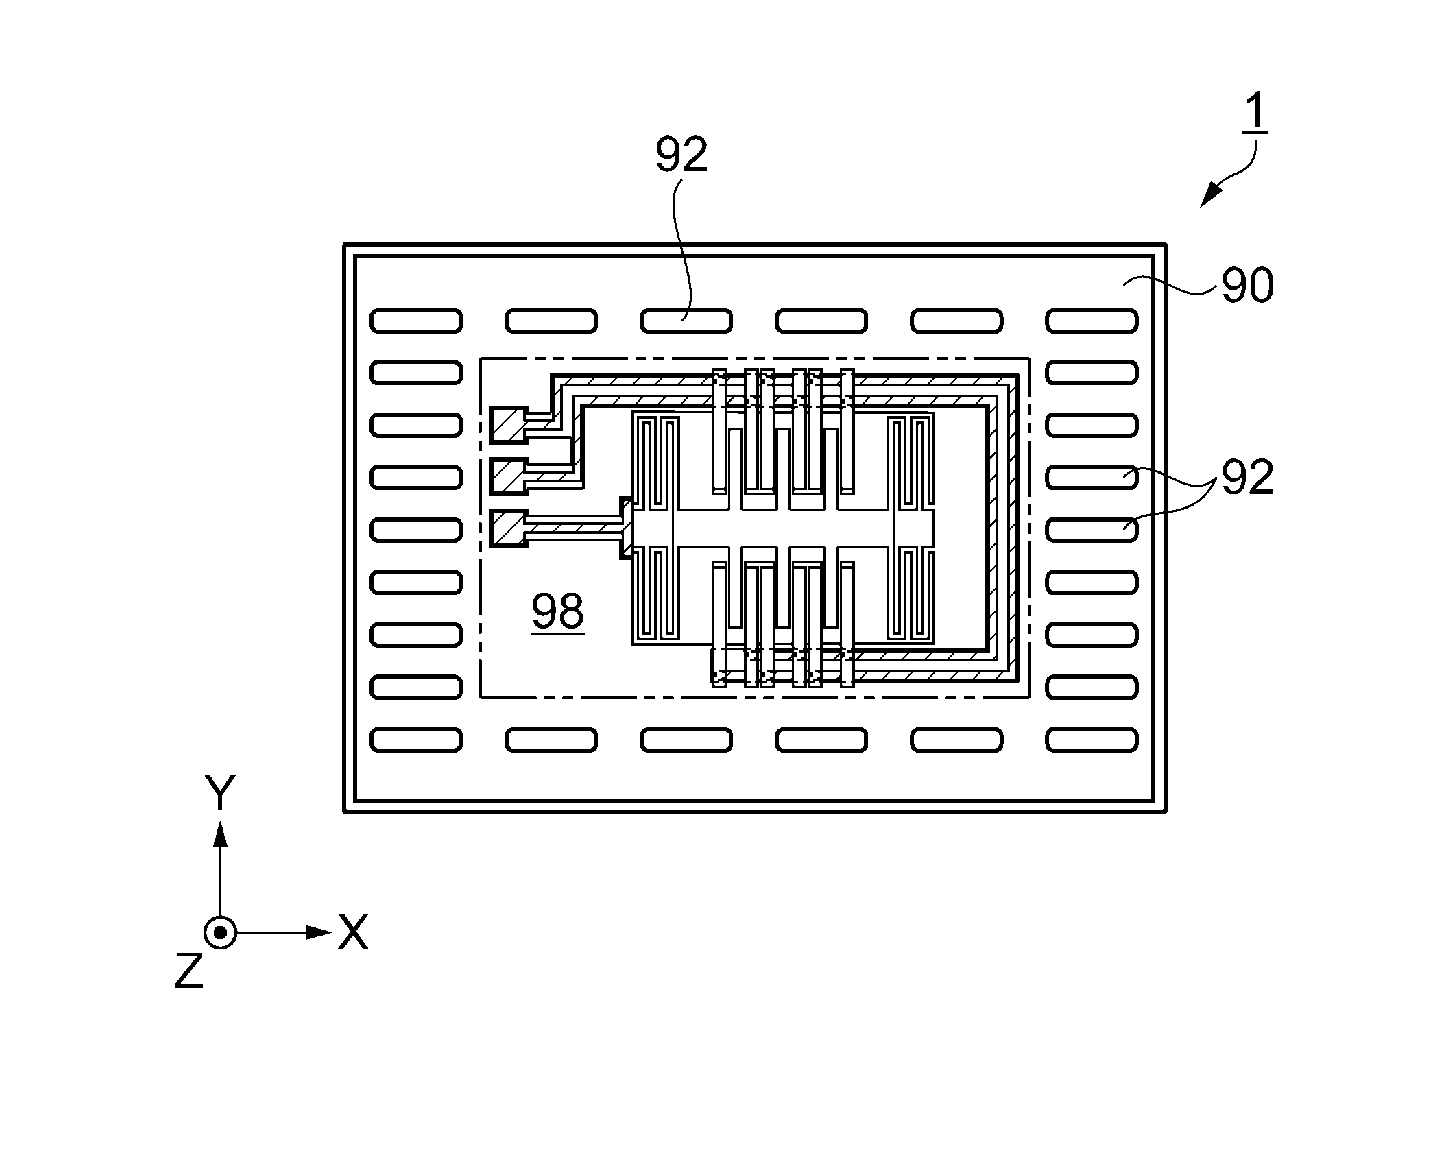 Electronic device, method of manufacturing electronic device, physical quantity sensor, electronic apparatus, moving object